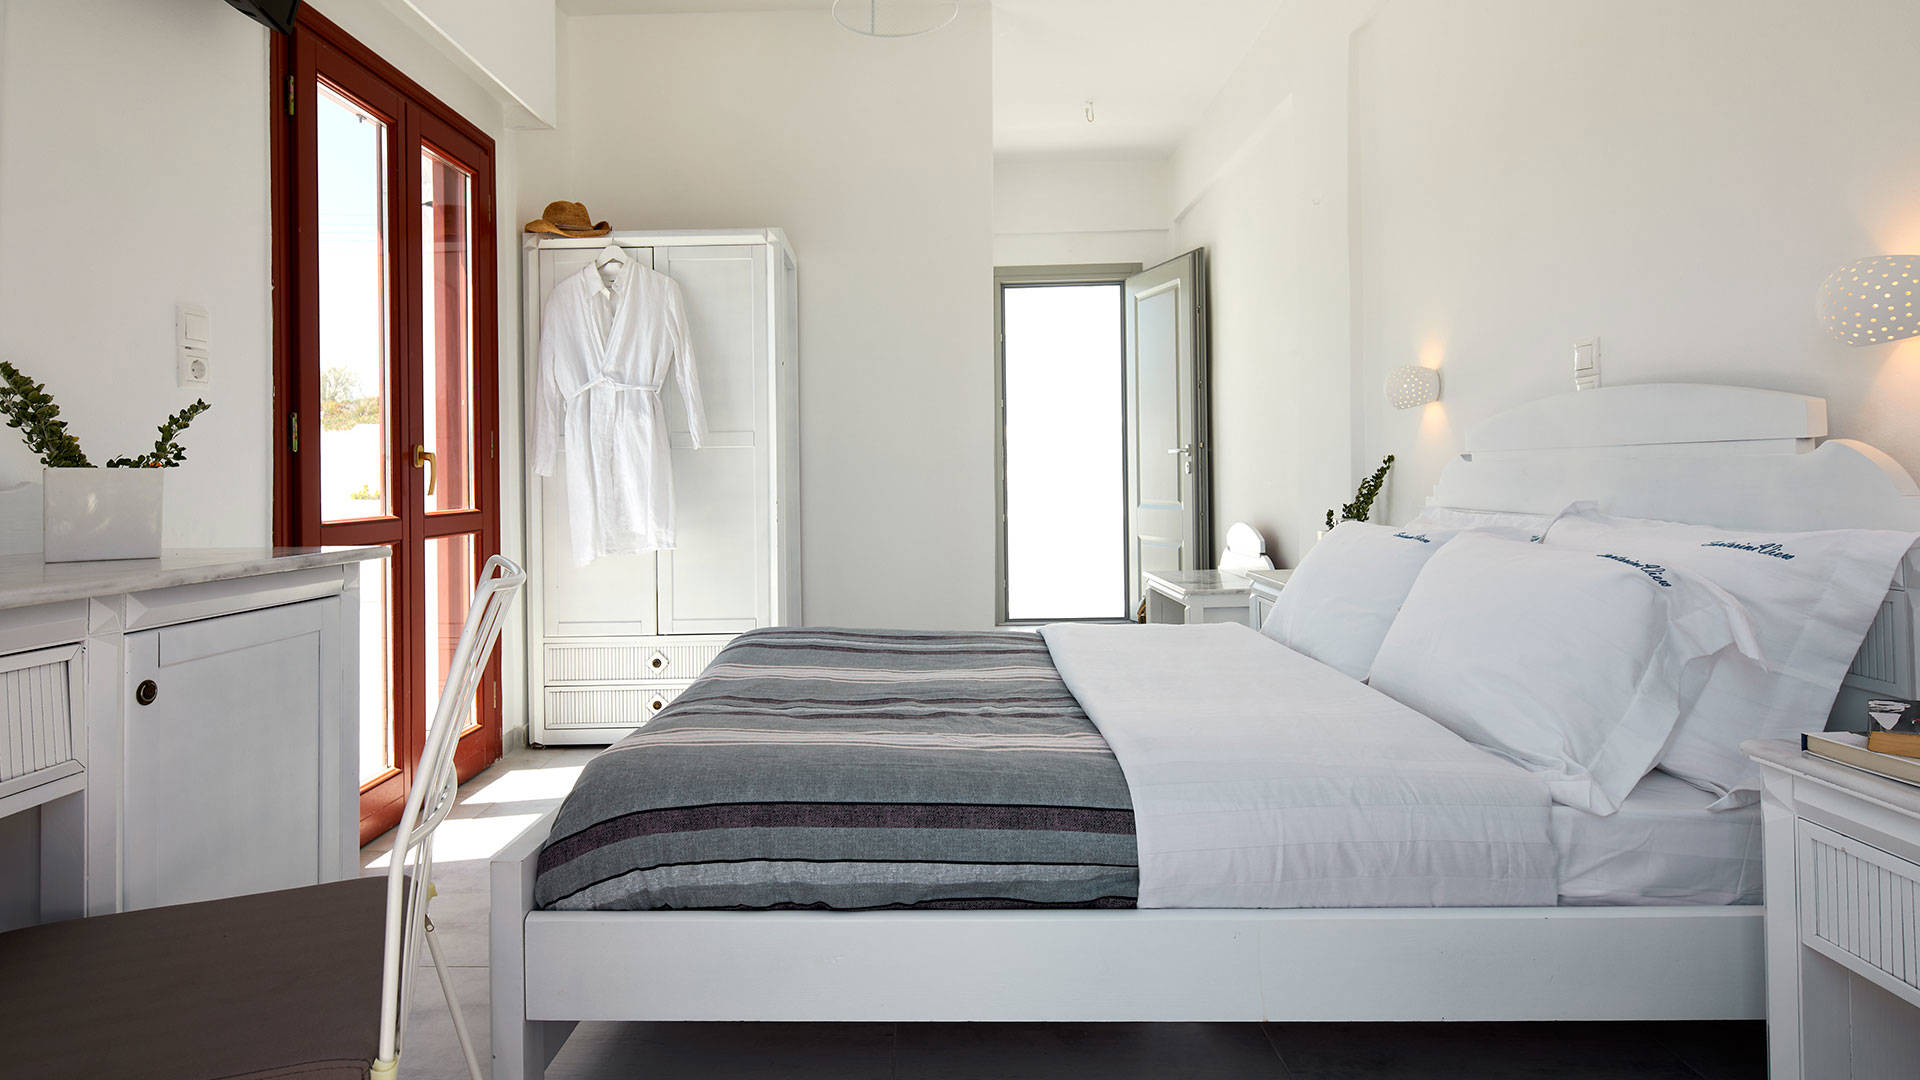 
Santorini View Hotel bedroom with king size bed, bedside table and white closet and furnitures